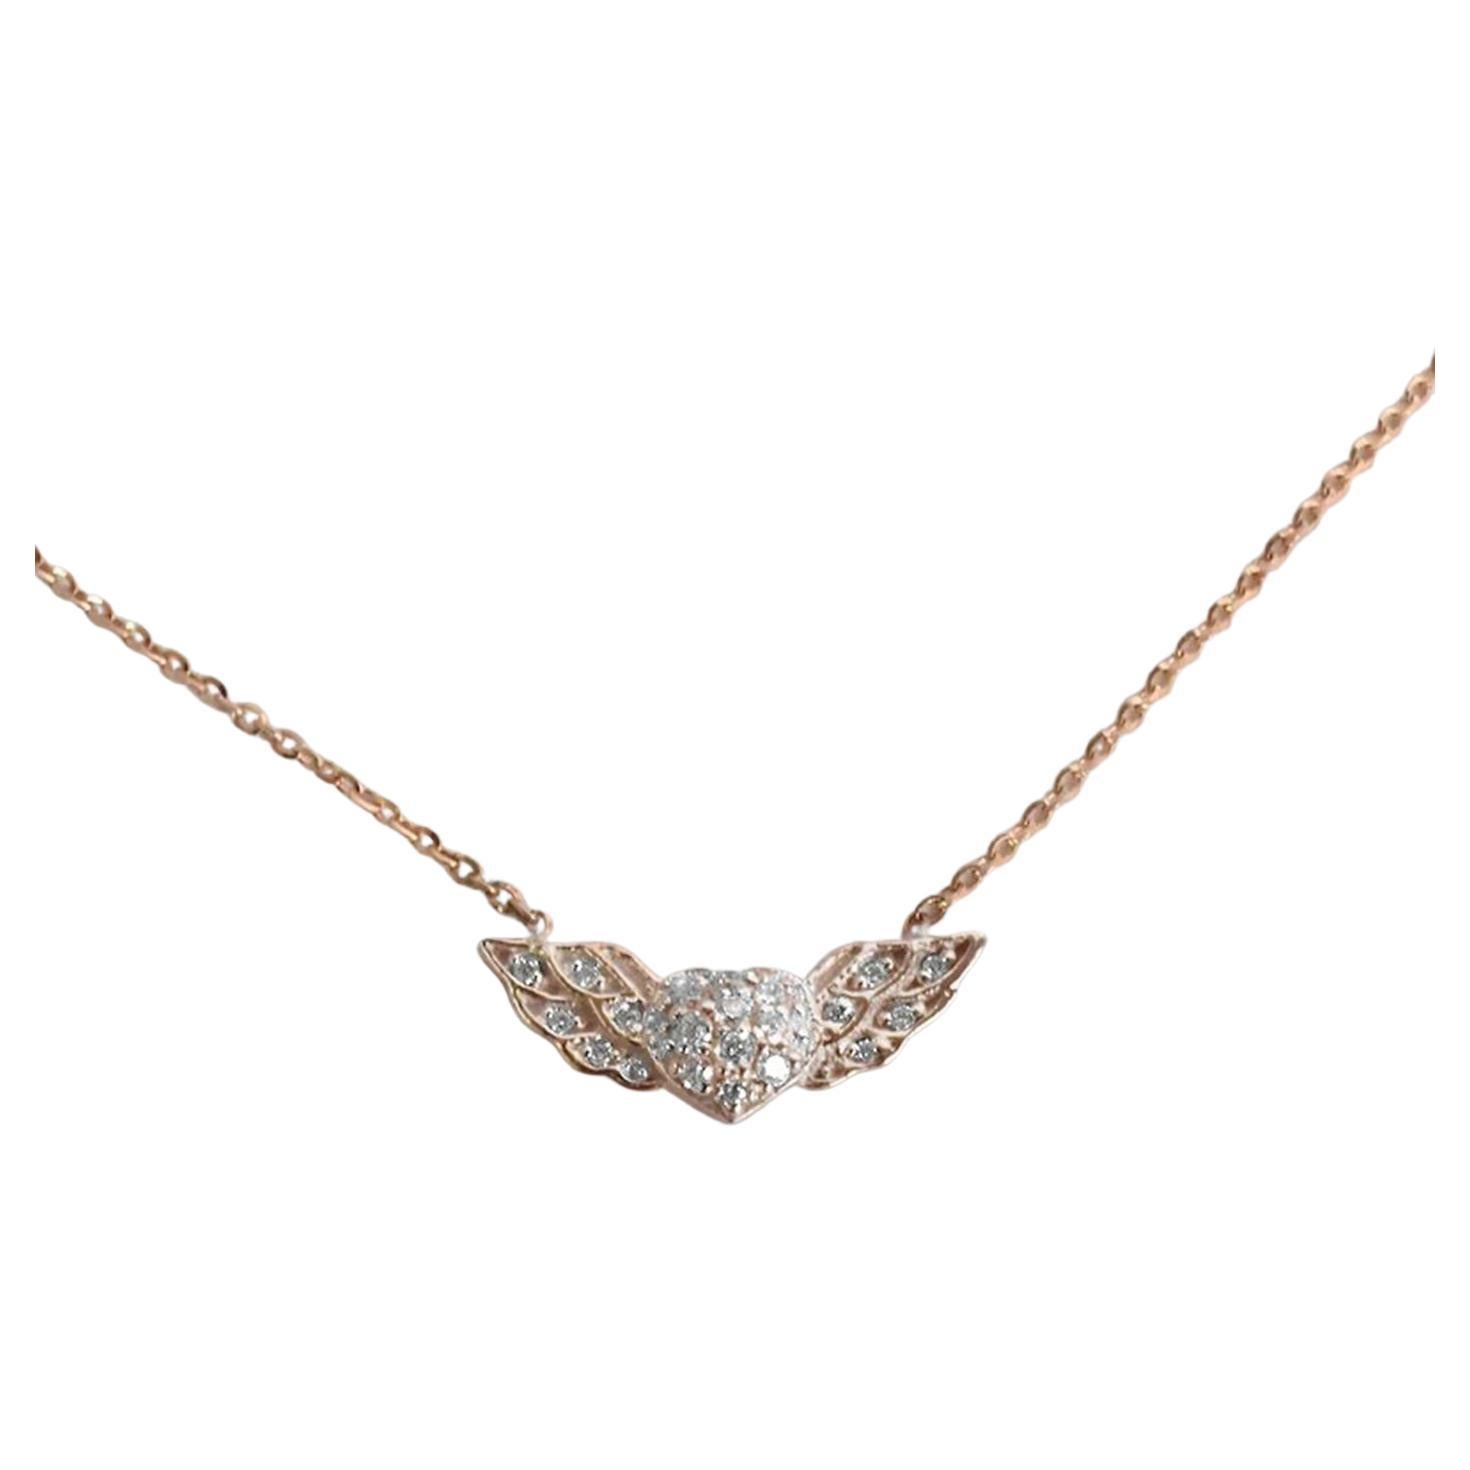 Valentine Jewelry Winged Heart Diamond Necklace is made of 18k solid gold.
Available in three colors of gold: Rose Gold / White Gold / Yellow Gold.

Natural genuine round cut diamond, each diamond is hand selected by me to ensure quality and set by